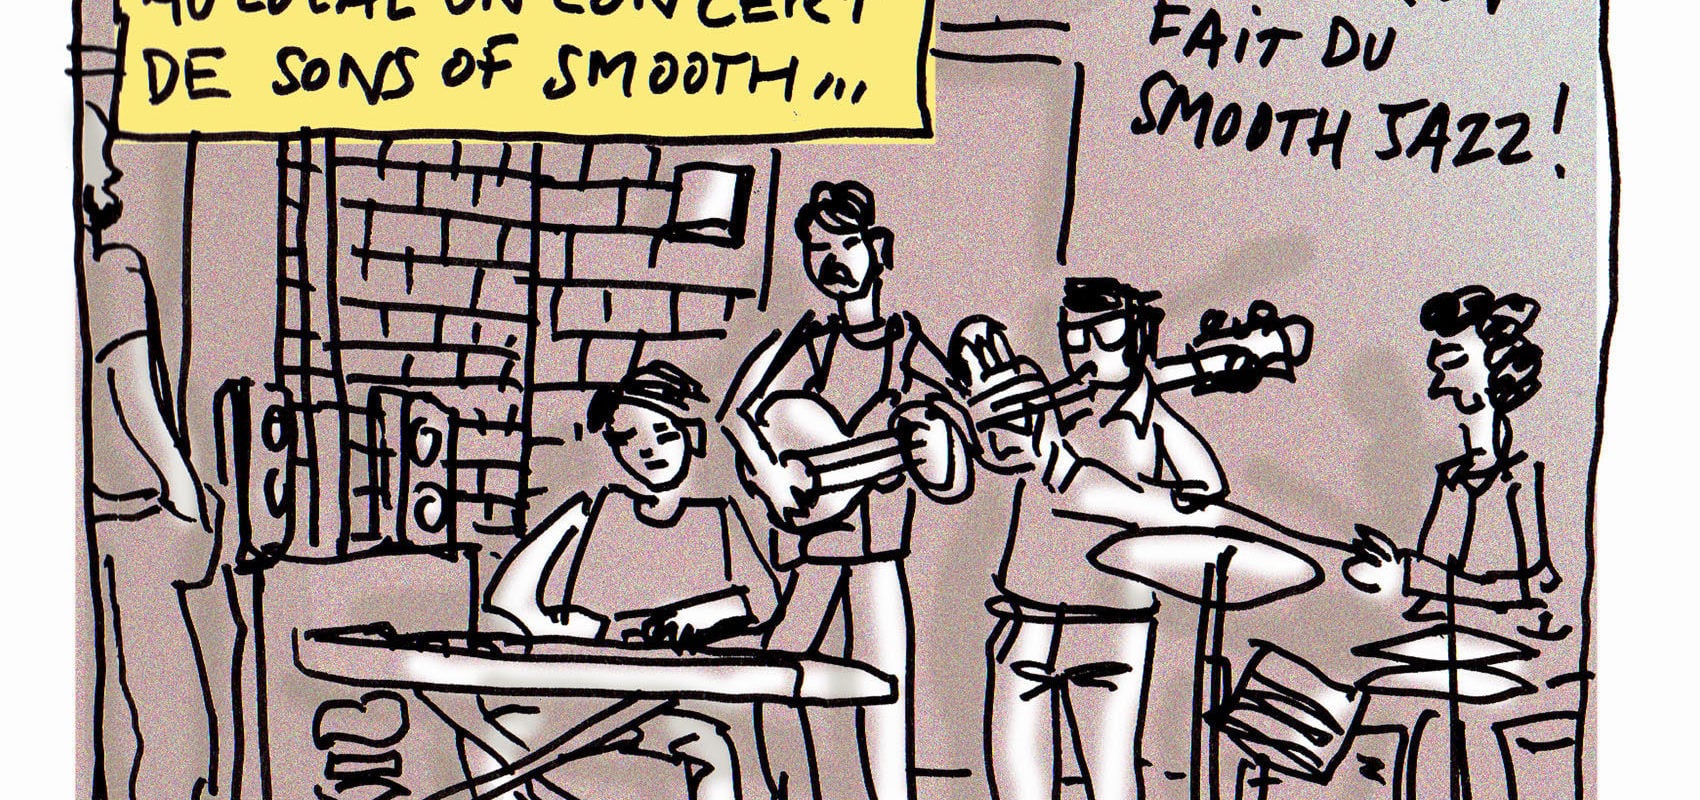 Le jazz tranquille de Sons of Smooth au Local